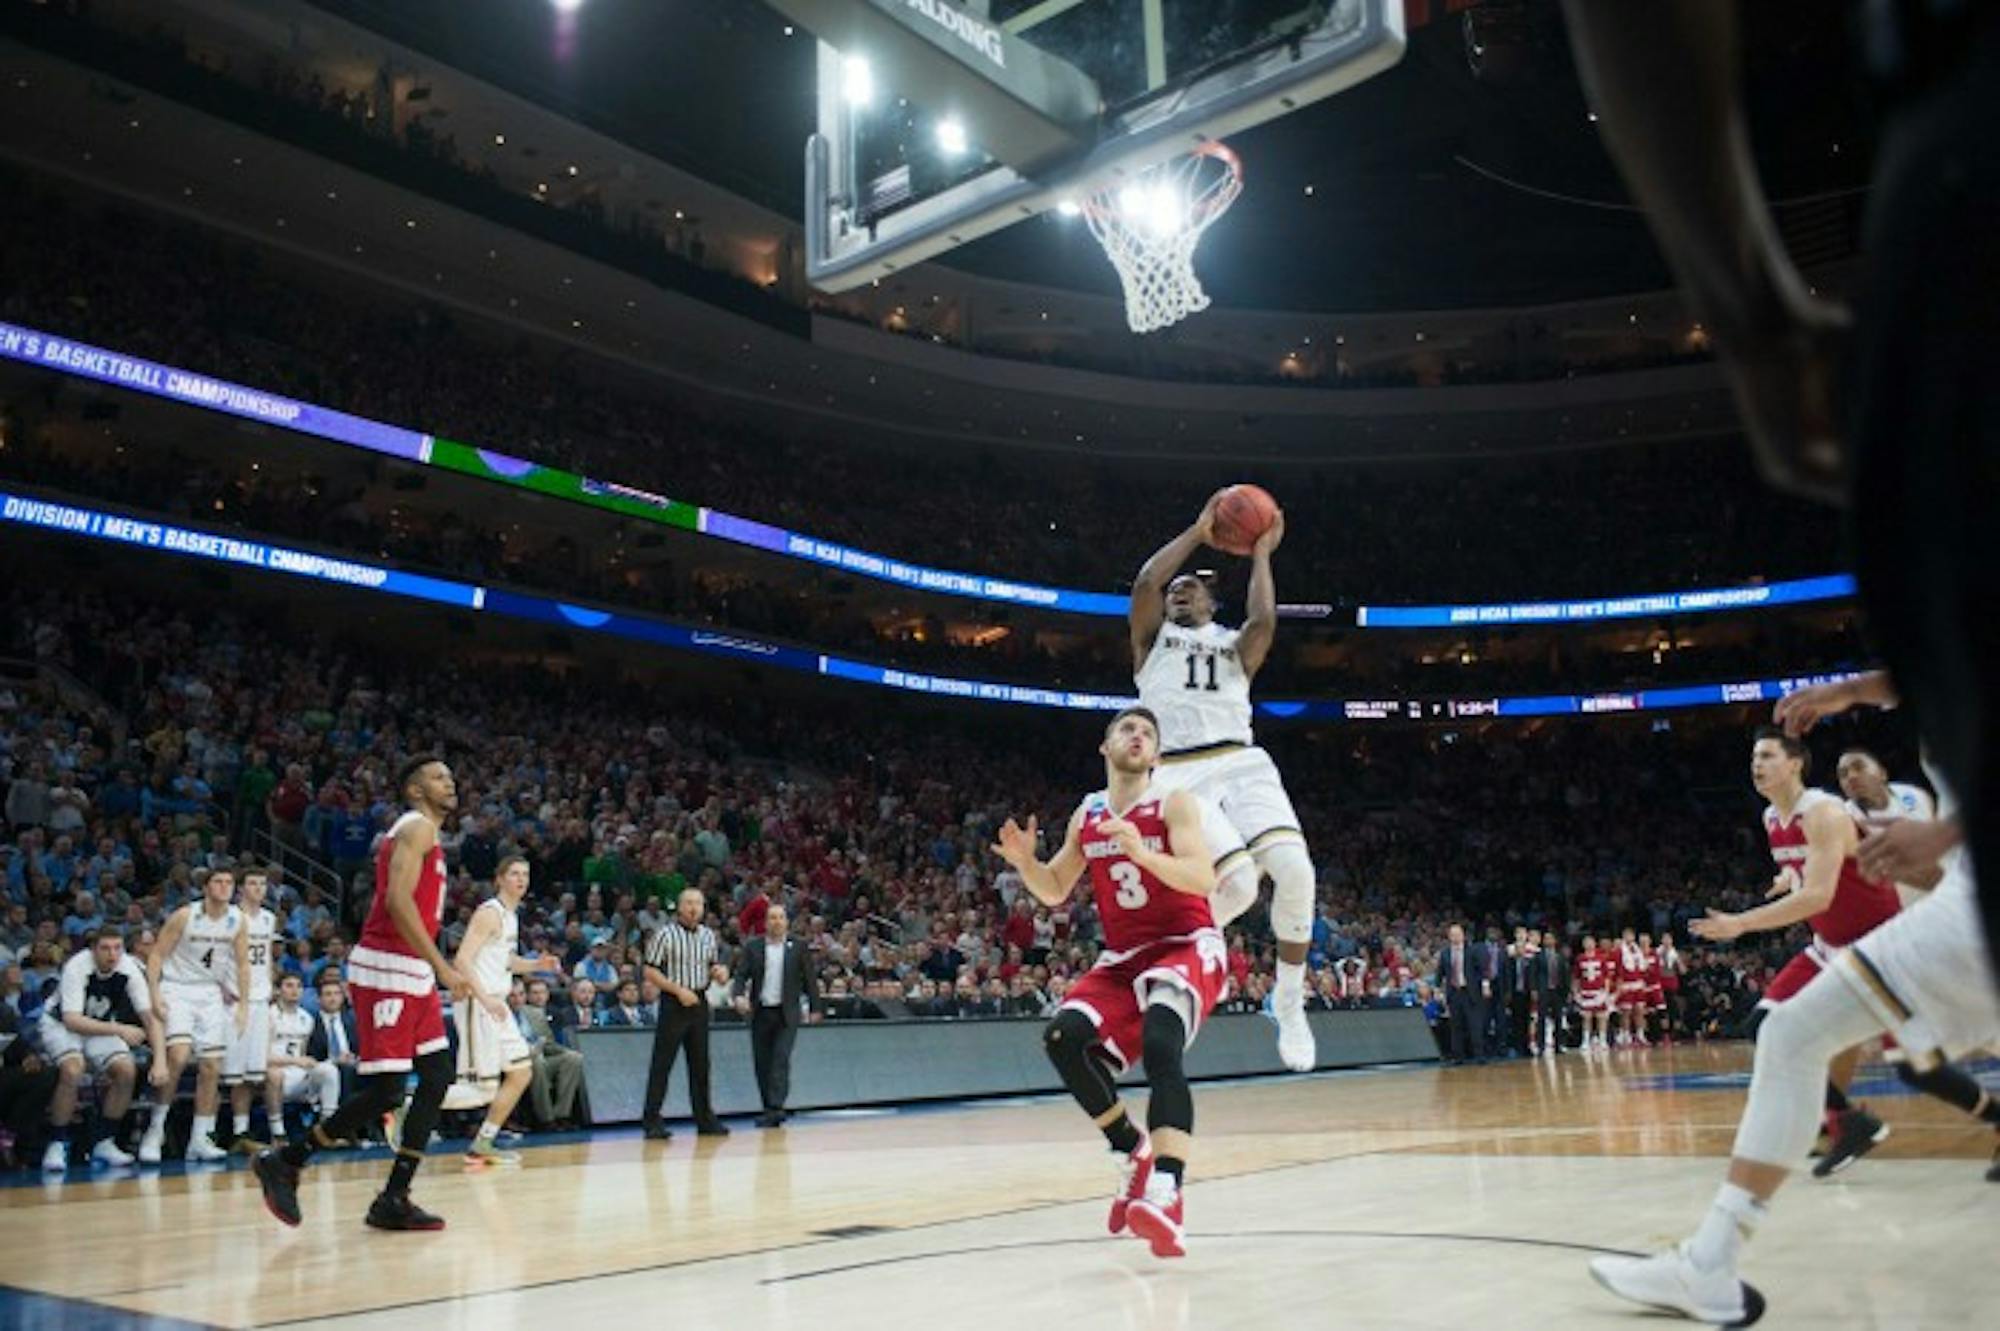 Irish junior guard Demetrius Jackson lays in the game-winning shot with 14 seconds left in Notre Dame’s 61-56 win over Wisconsin on Friday in Philadelphia.